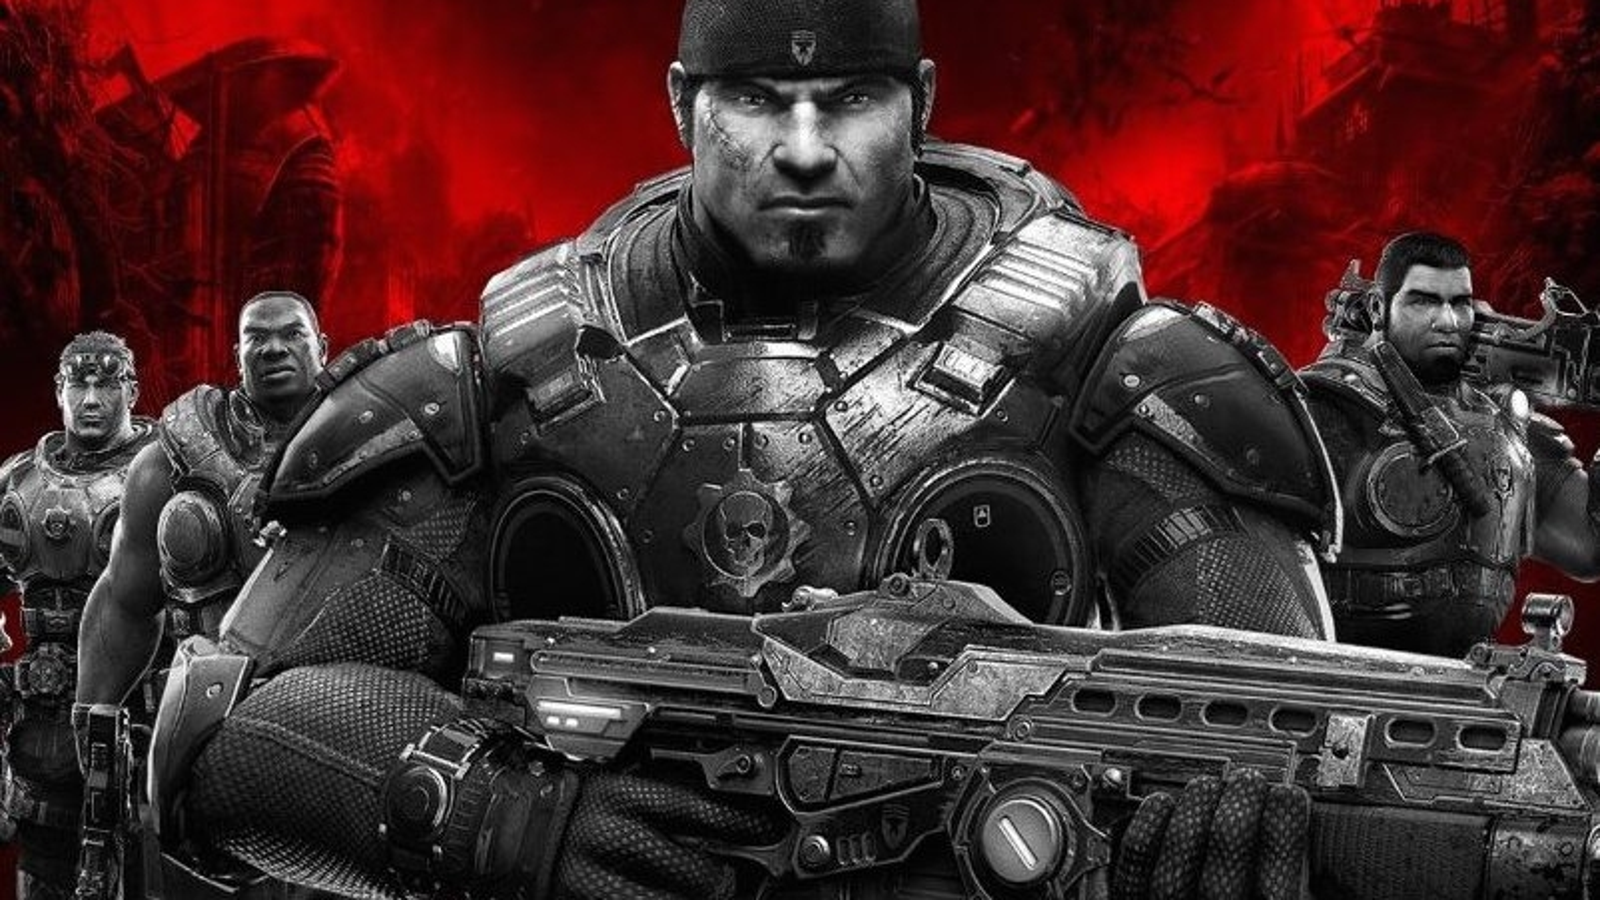 The making of Gears of War: Ultimate Edition